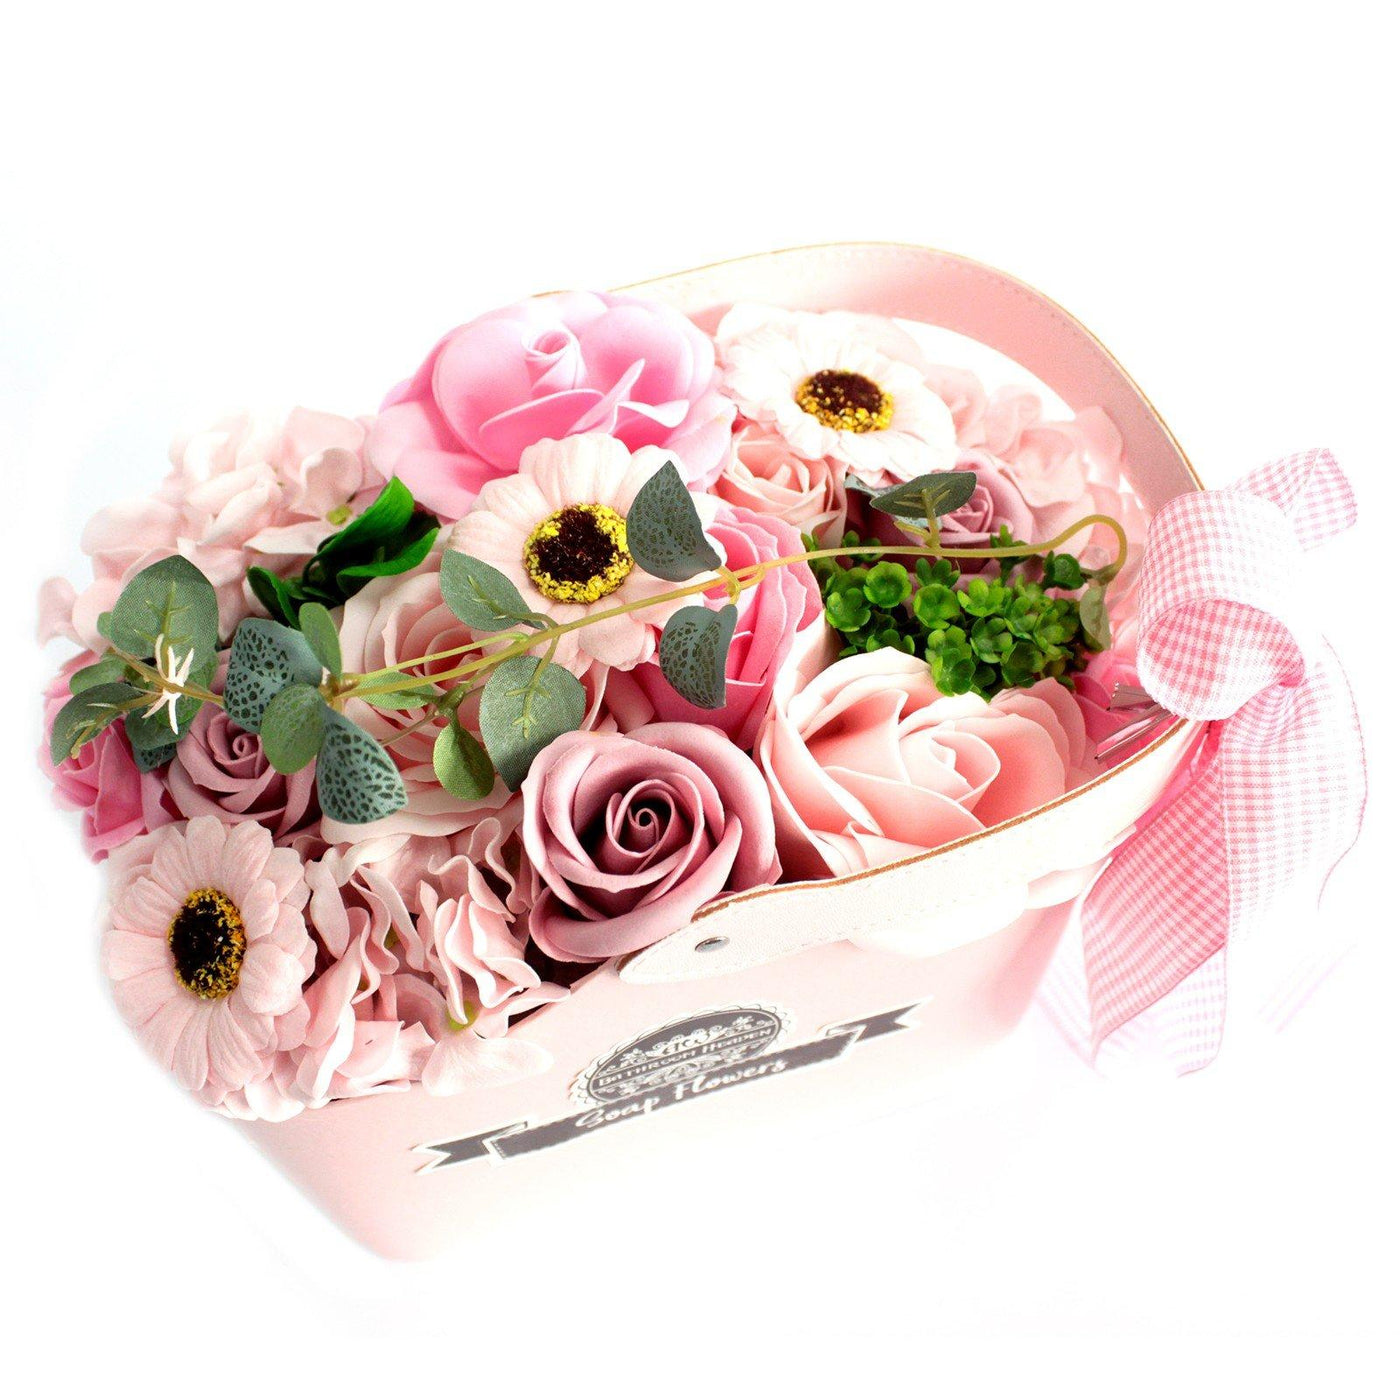 Beautifully Packed In Gift Basket Pink Body Soap Flowers, Perfect Wedding Gift, Birthday Gift, Christmas Stocking Filler.